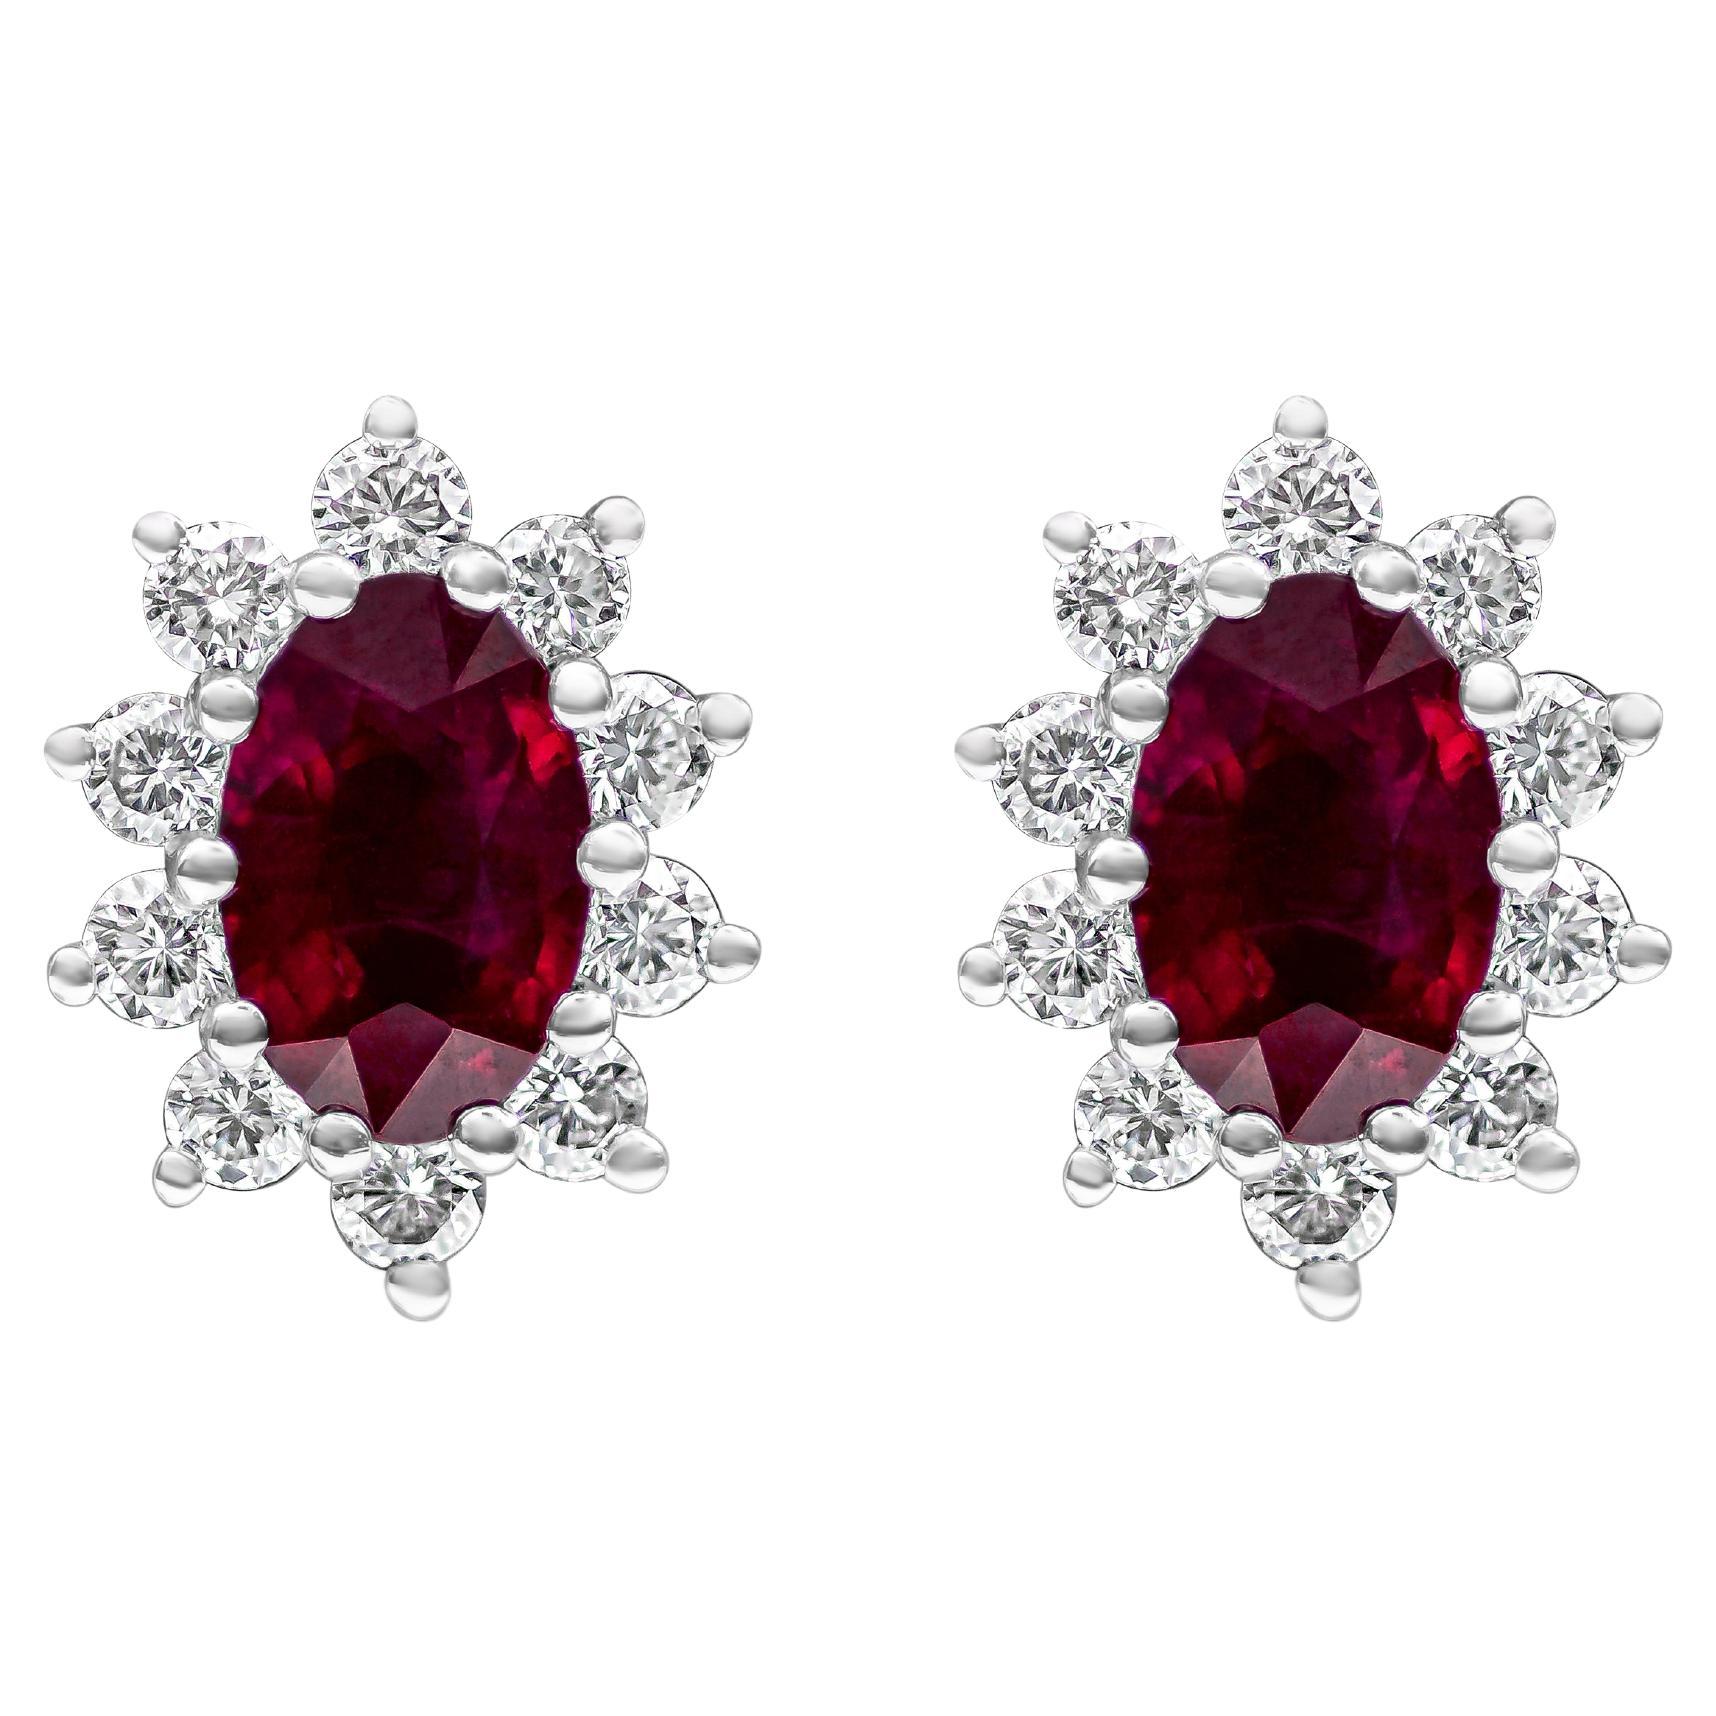 Roman Malakov, 1.11 Carat Total Red Ruby and Diamond Halo Earrings in White Gold